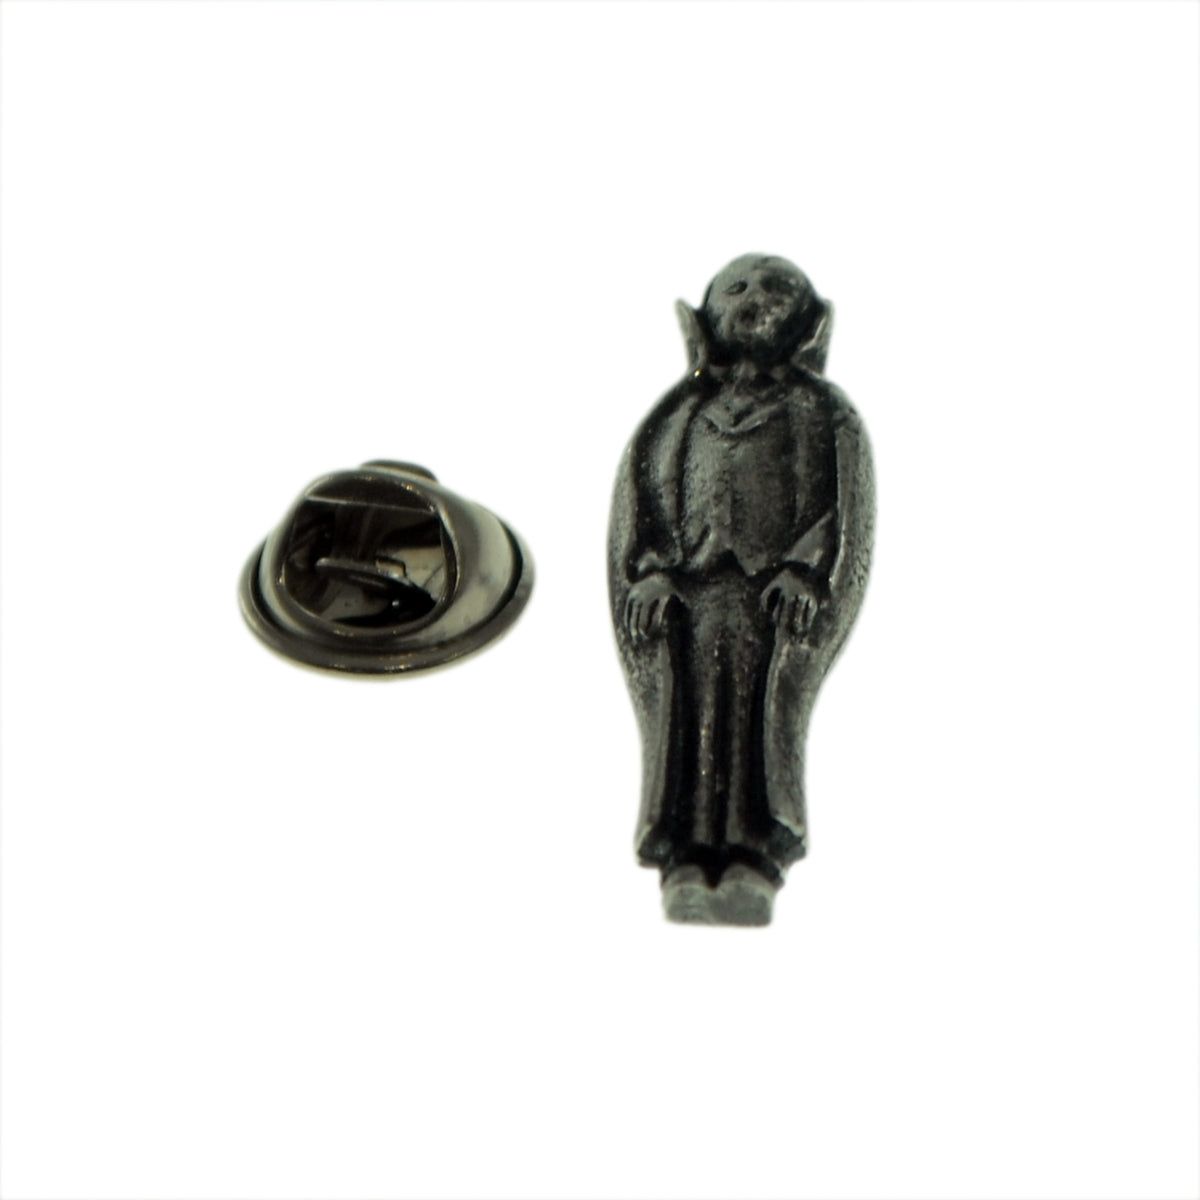 Count Dracula Pewter Lapel Pin Badge - Ashton and Finch